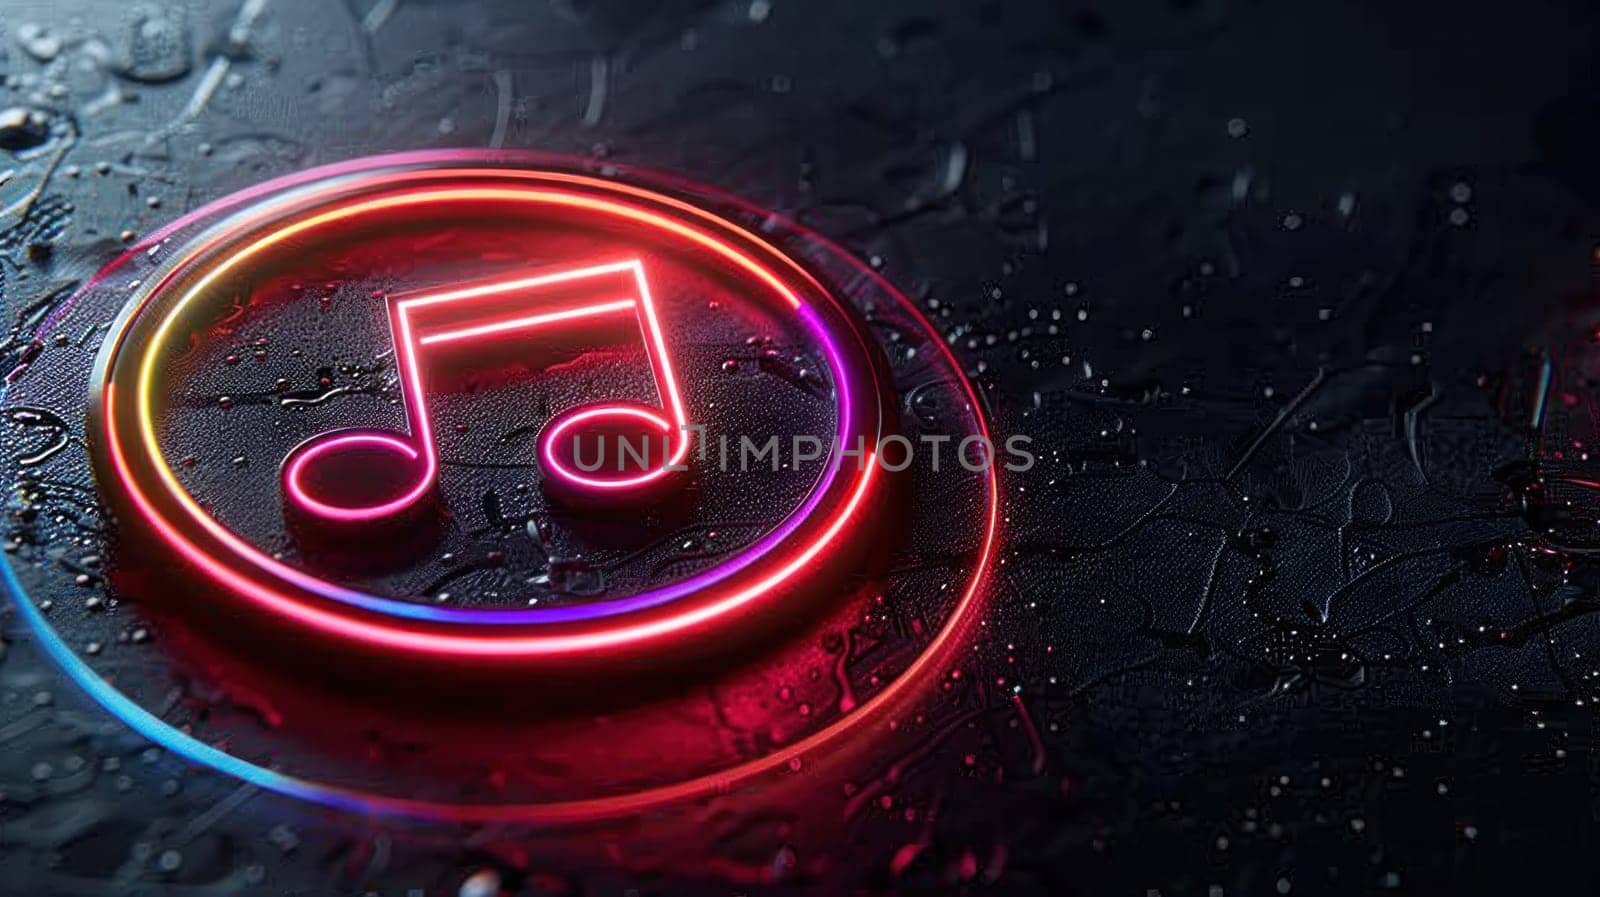 A colorful, glowing circle with a musical note in the center by golfmerrymaker